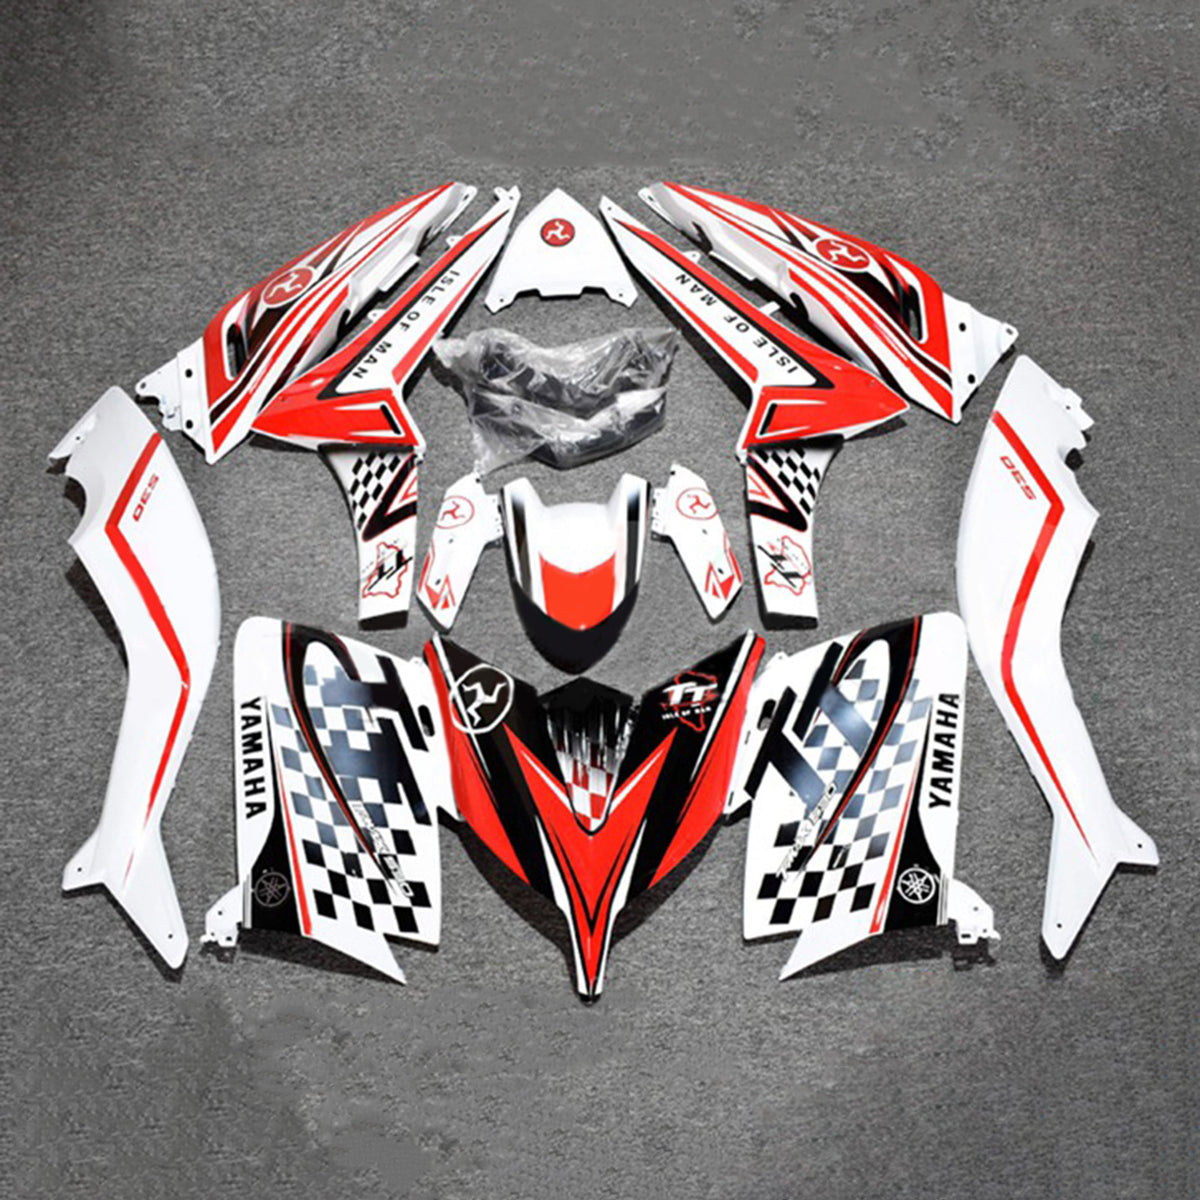 Amotopart 2015-2016 Yamaha T-Max TMAX530 Fairing Red&White Checkerboard Style1 Kit